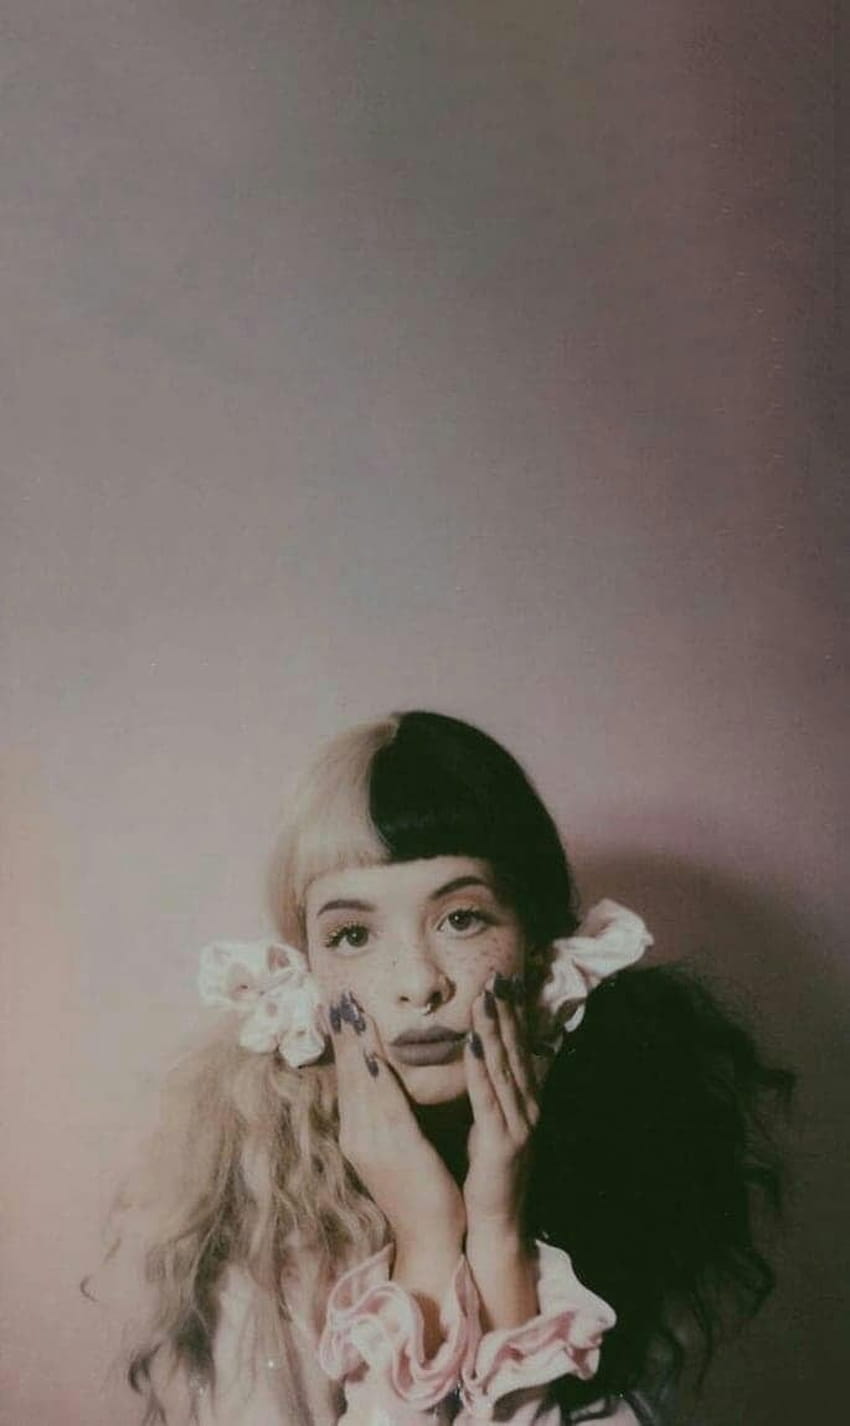 Melanie wallpapers/background for ur phone in purple ✨a e s t h e t i c✨ I  made :) : r/MelanieMartinez